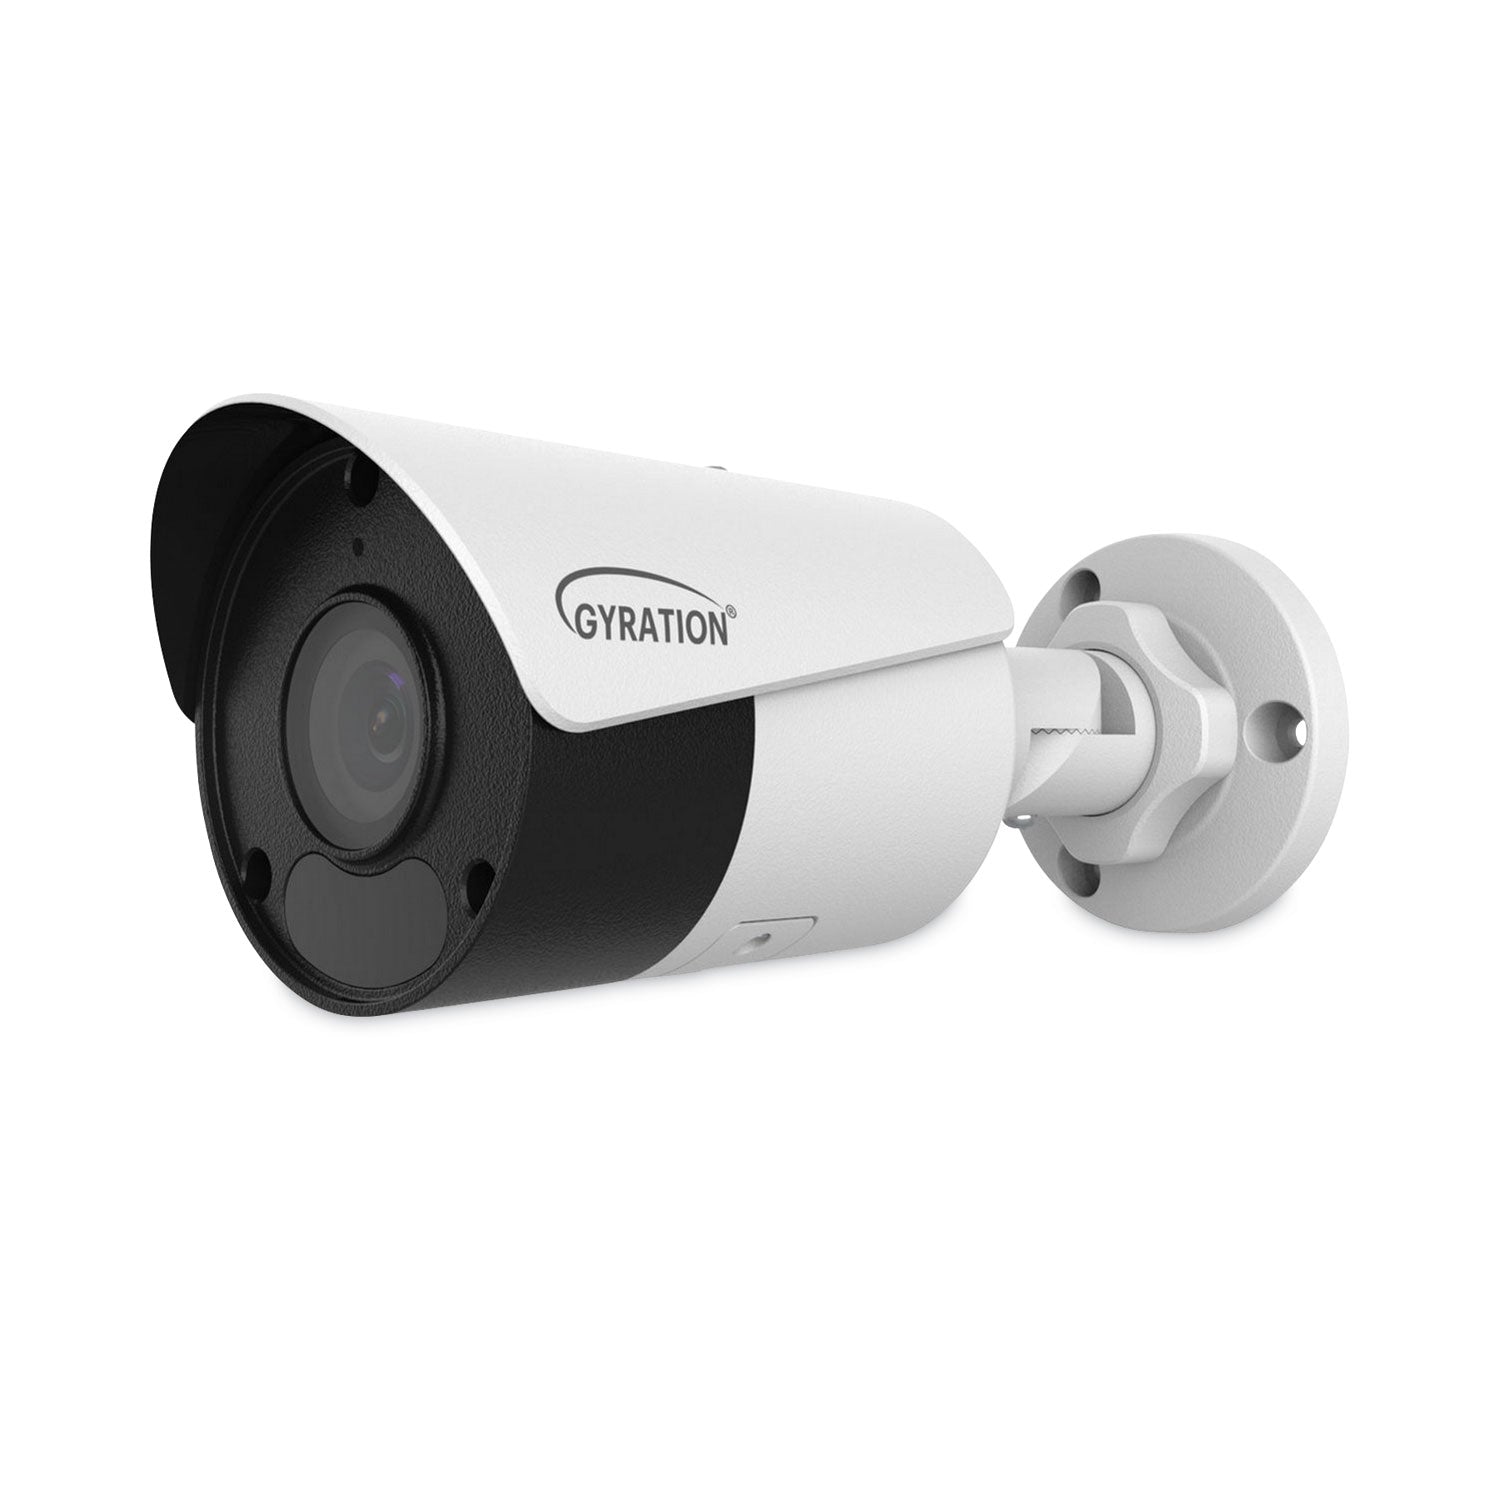 cyberview-400b-4-mp-outdoor-ir-fixed-bullet-camera_adecybrview400b - 1